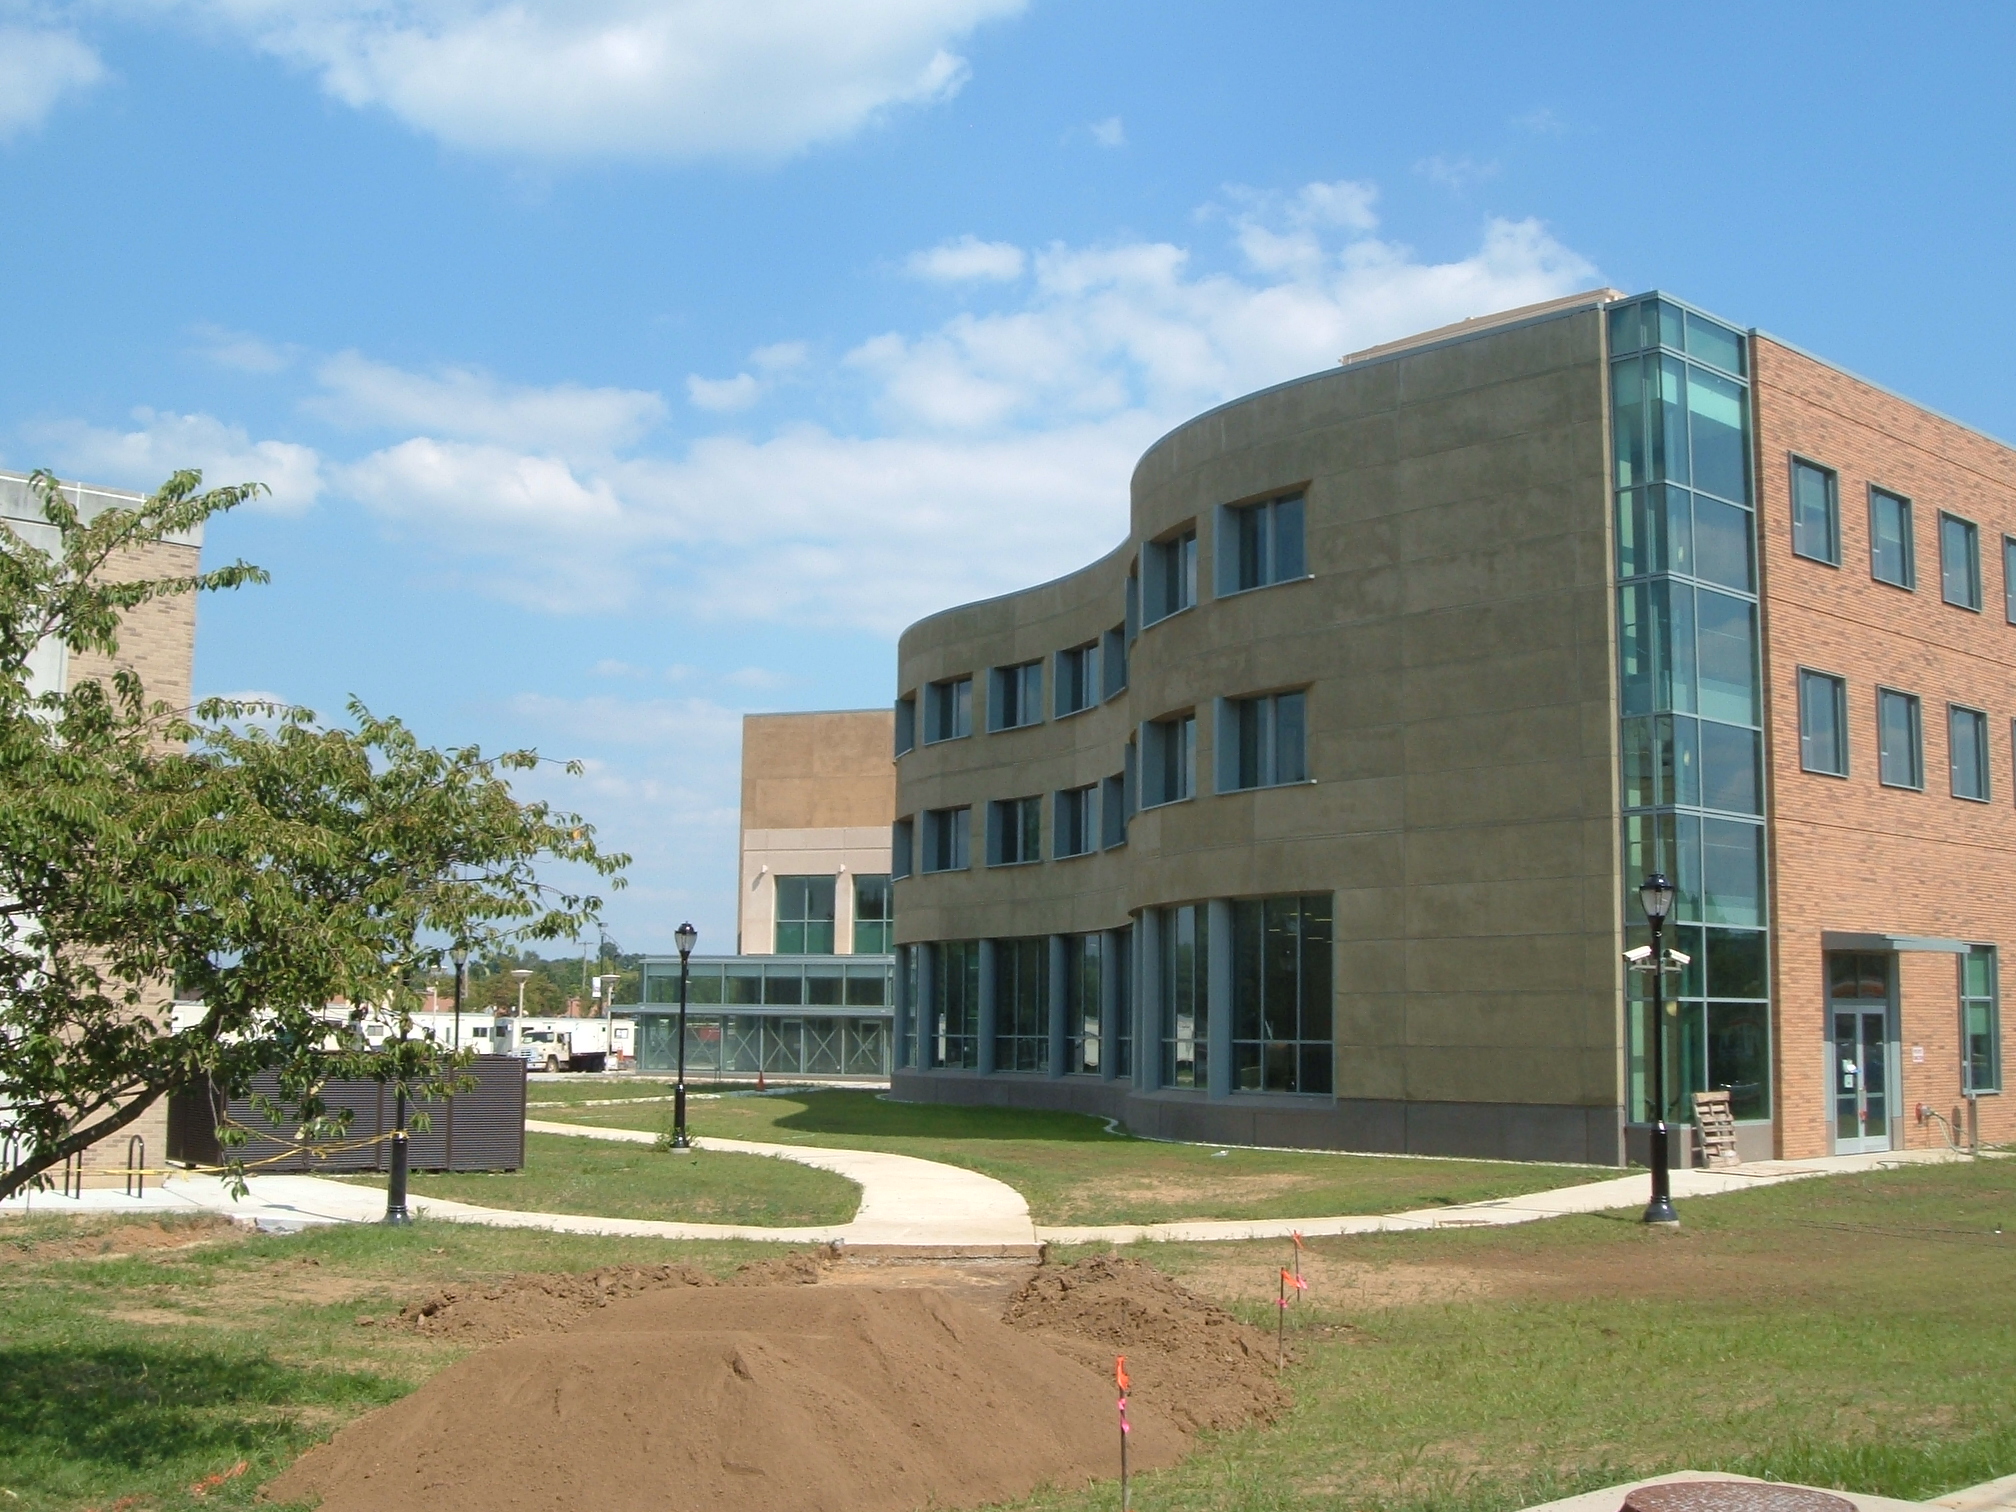 West Chester University Swope Music Building and PerformingArts Center